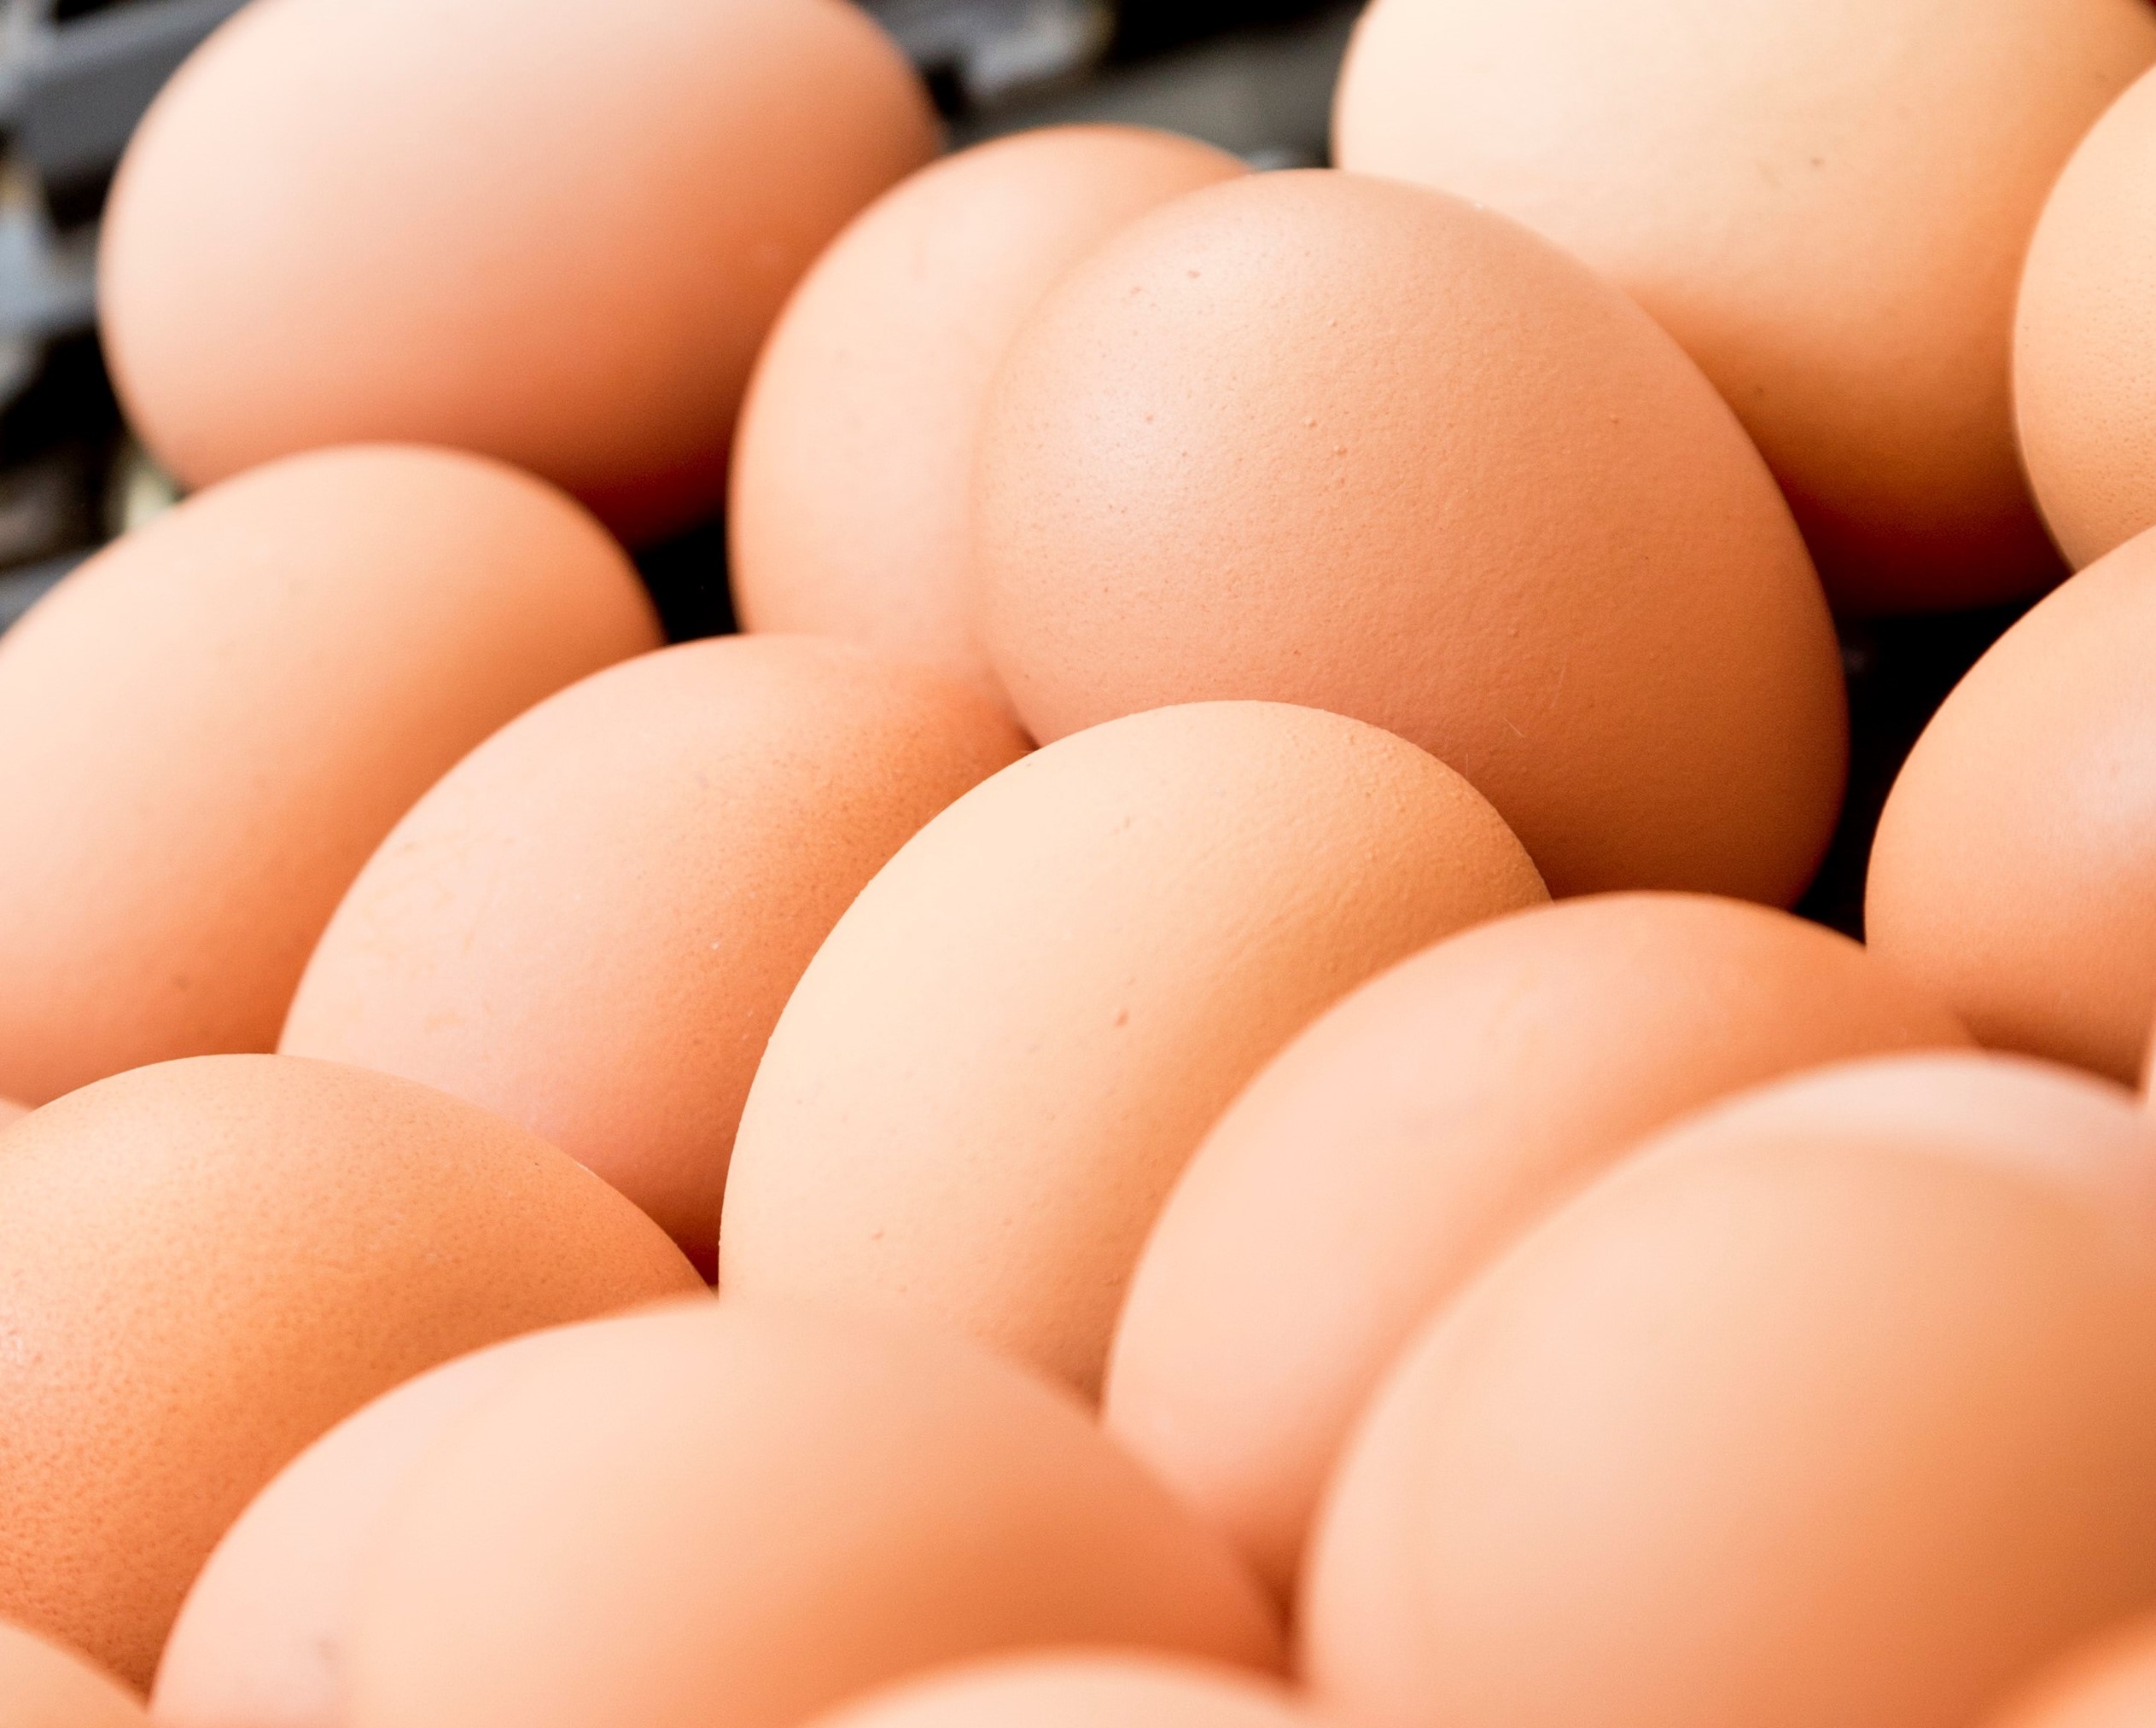 Preventing Salmonella in laying hens